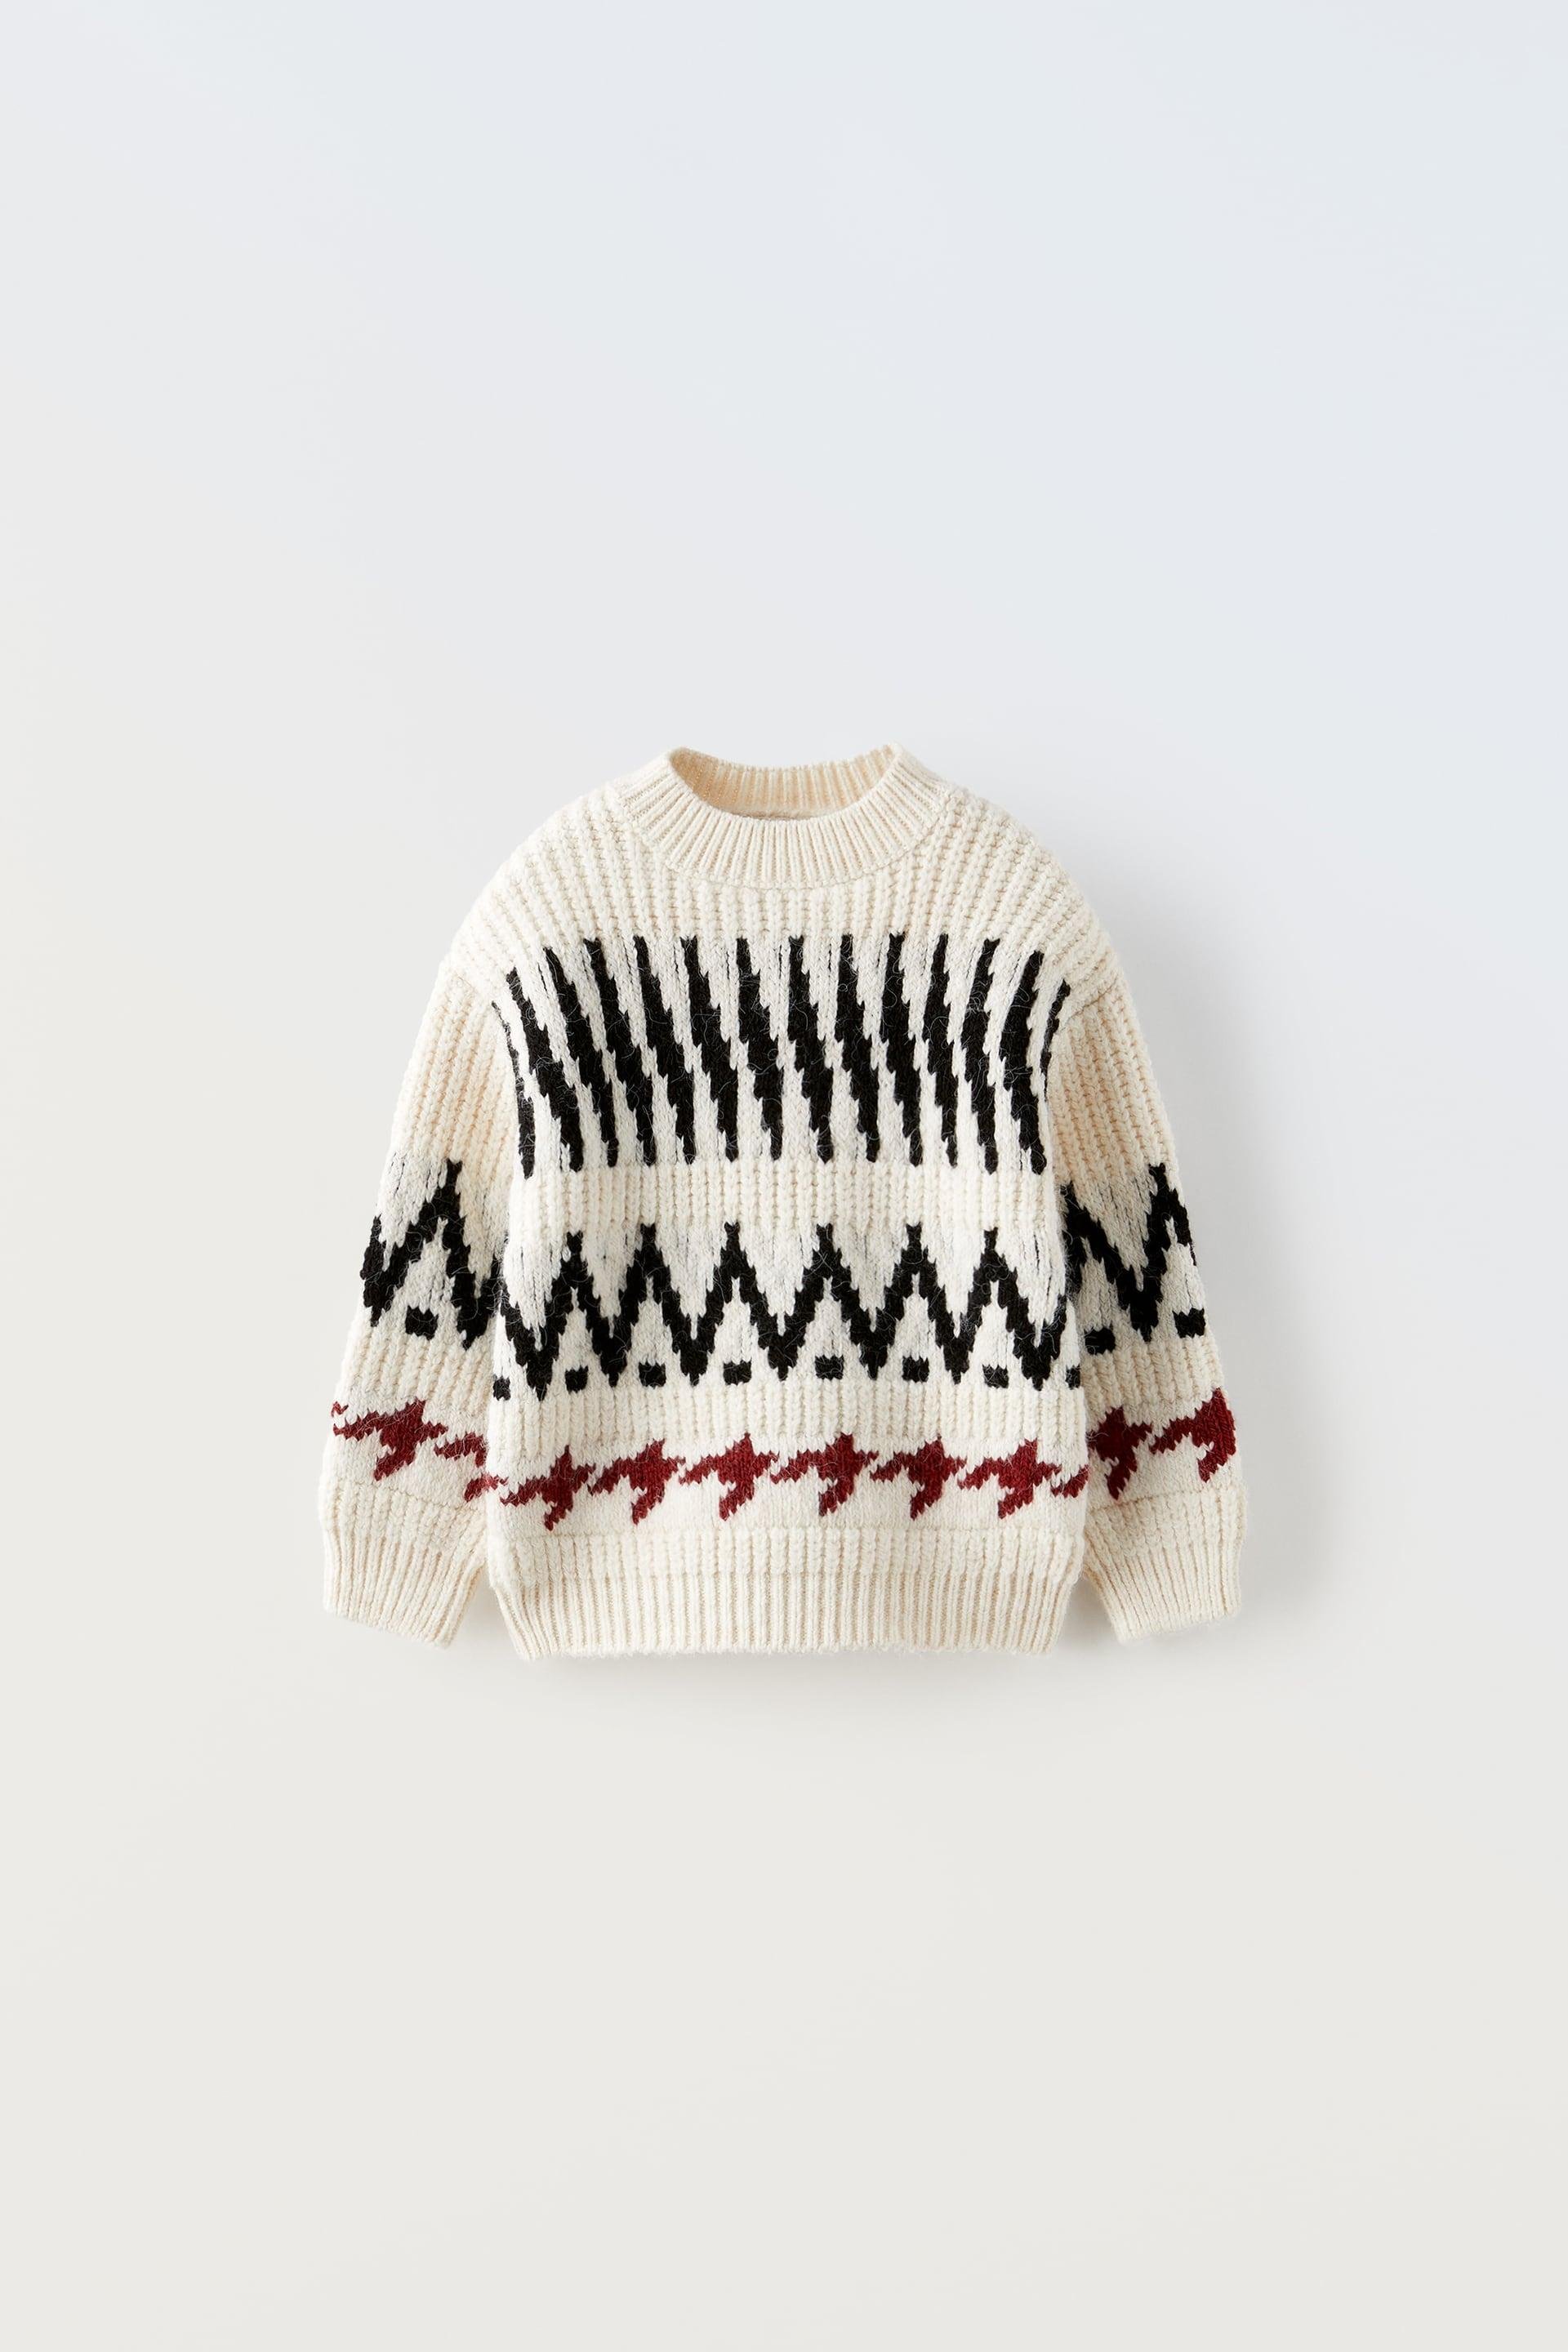 PRINTED KNIT SWEATER SKI COLLECTION by ZARA